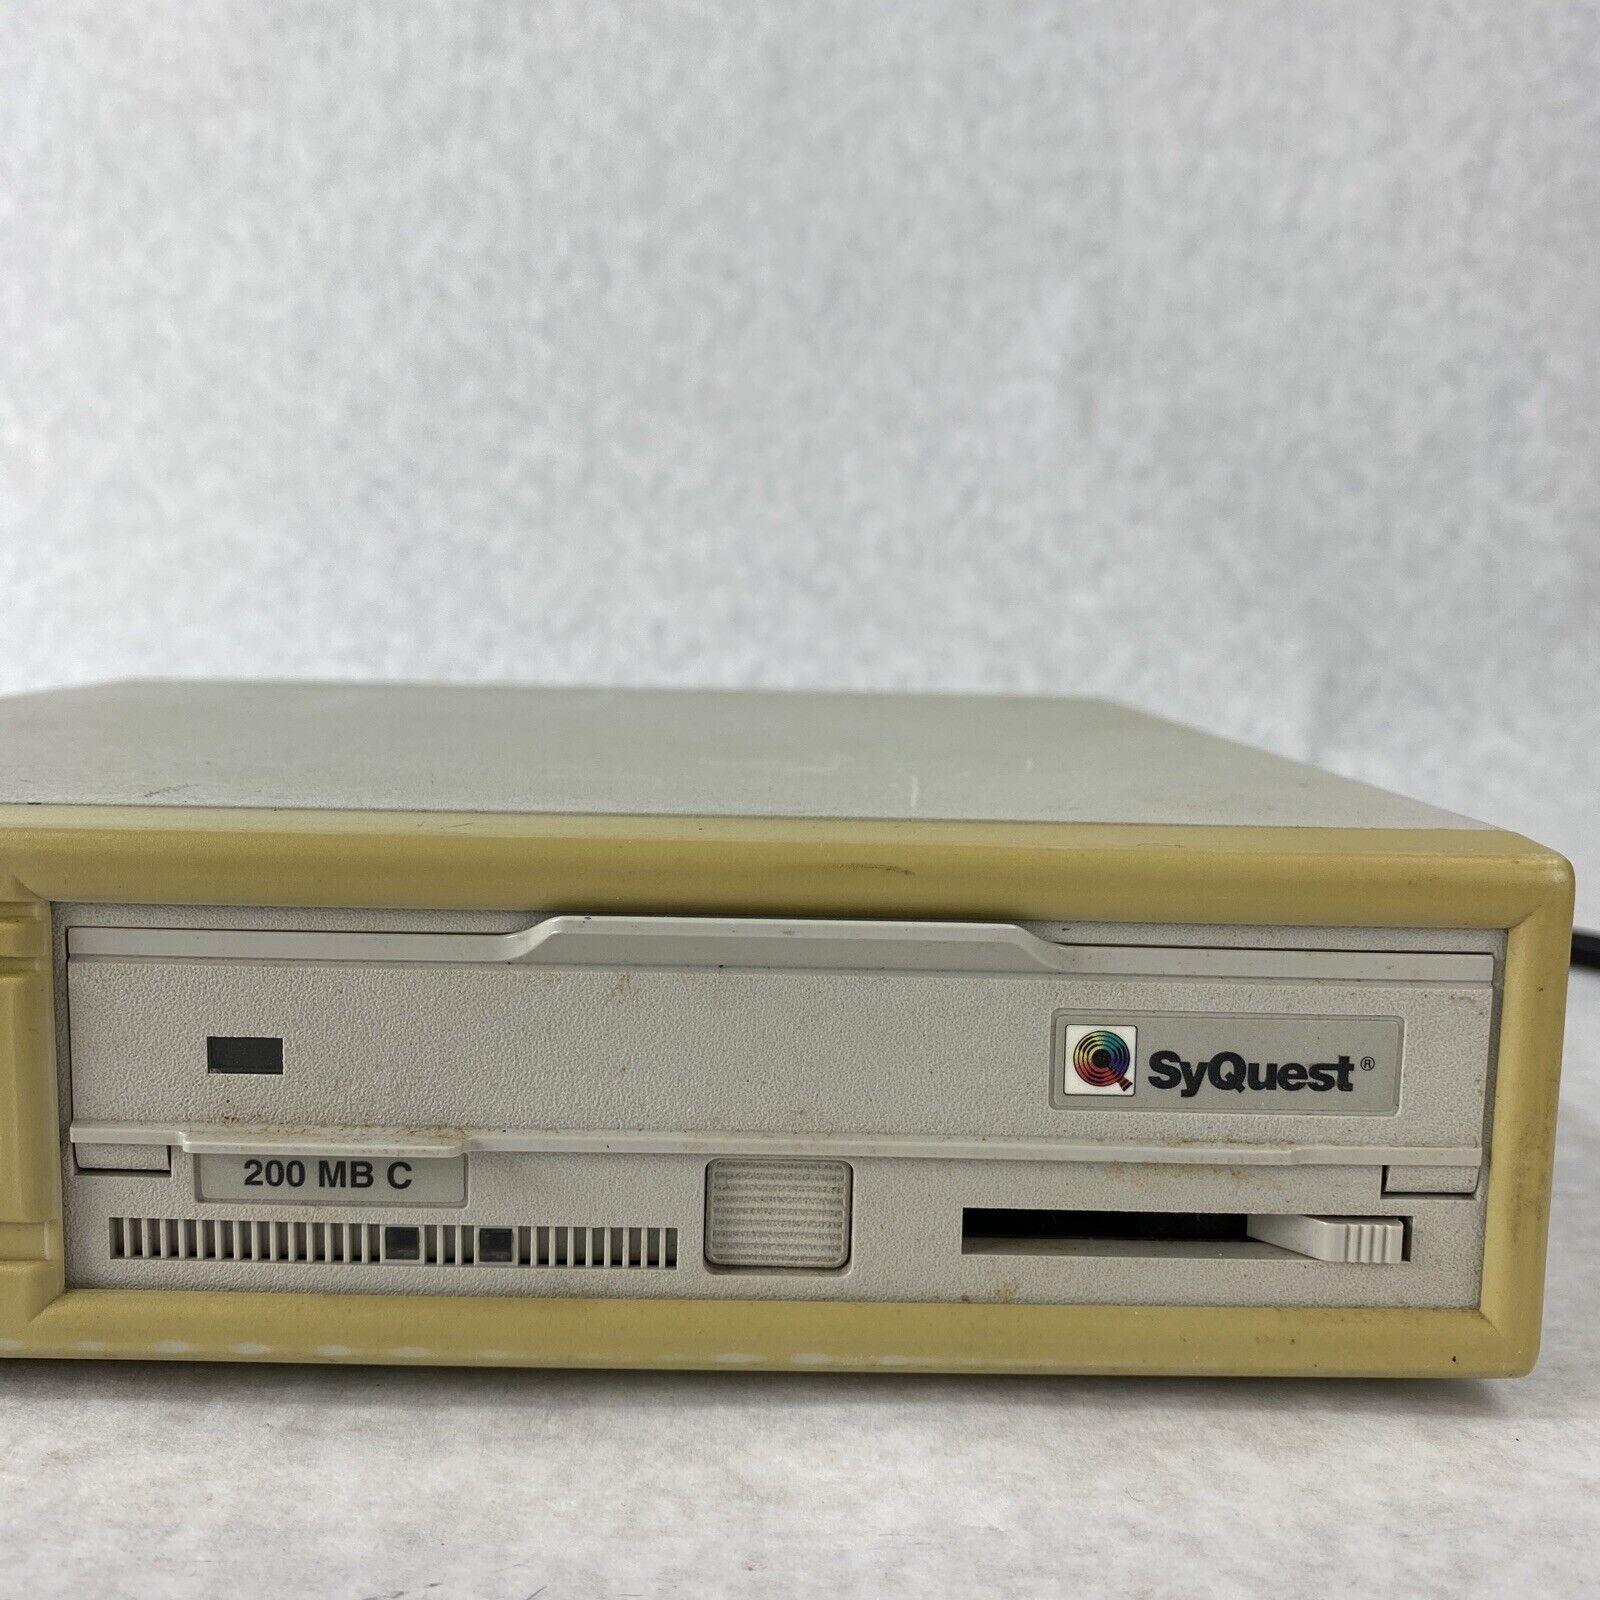 SyQuest 200 MB C MAC Warehouse Early Optical Drive SCSI 50 Pin 1996